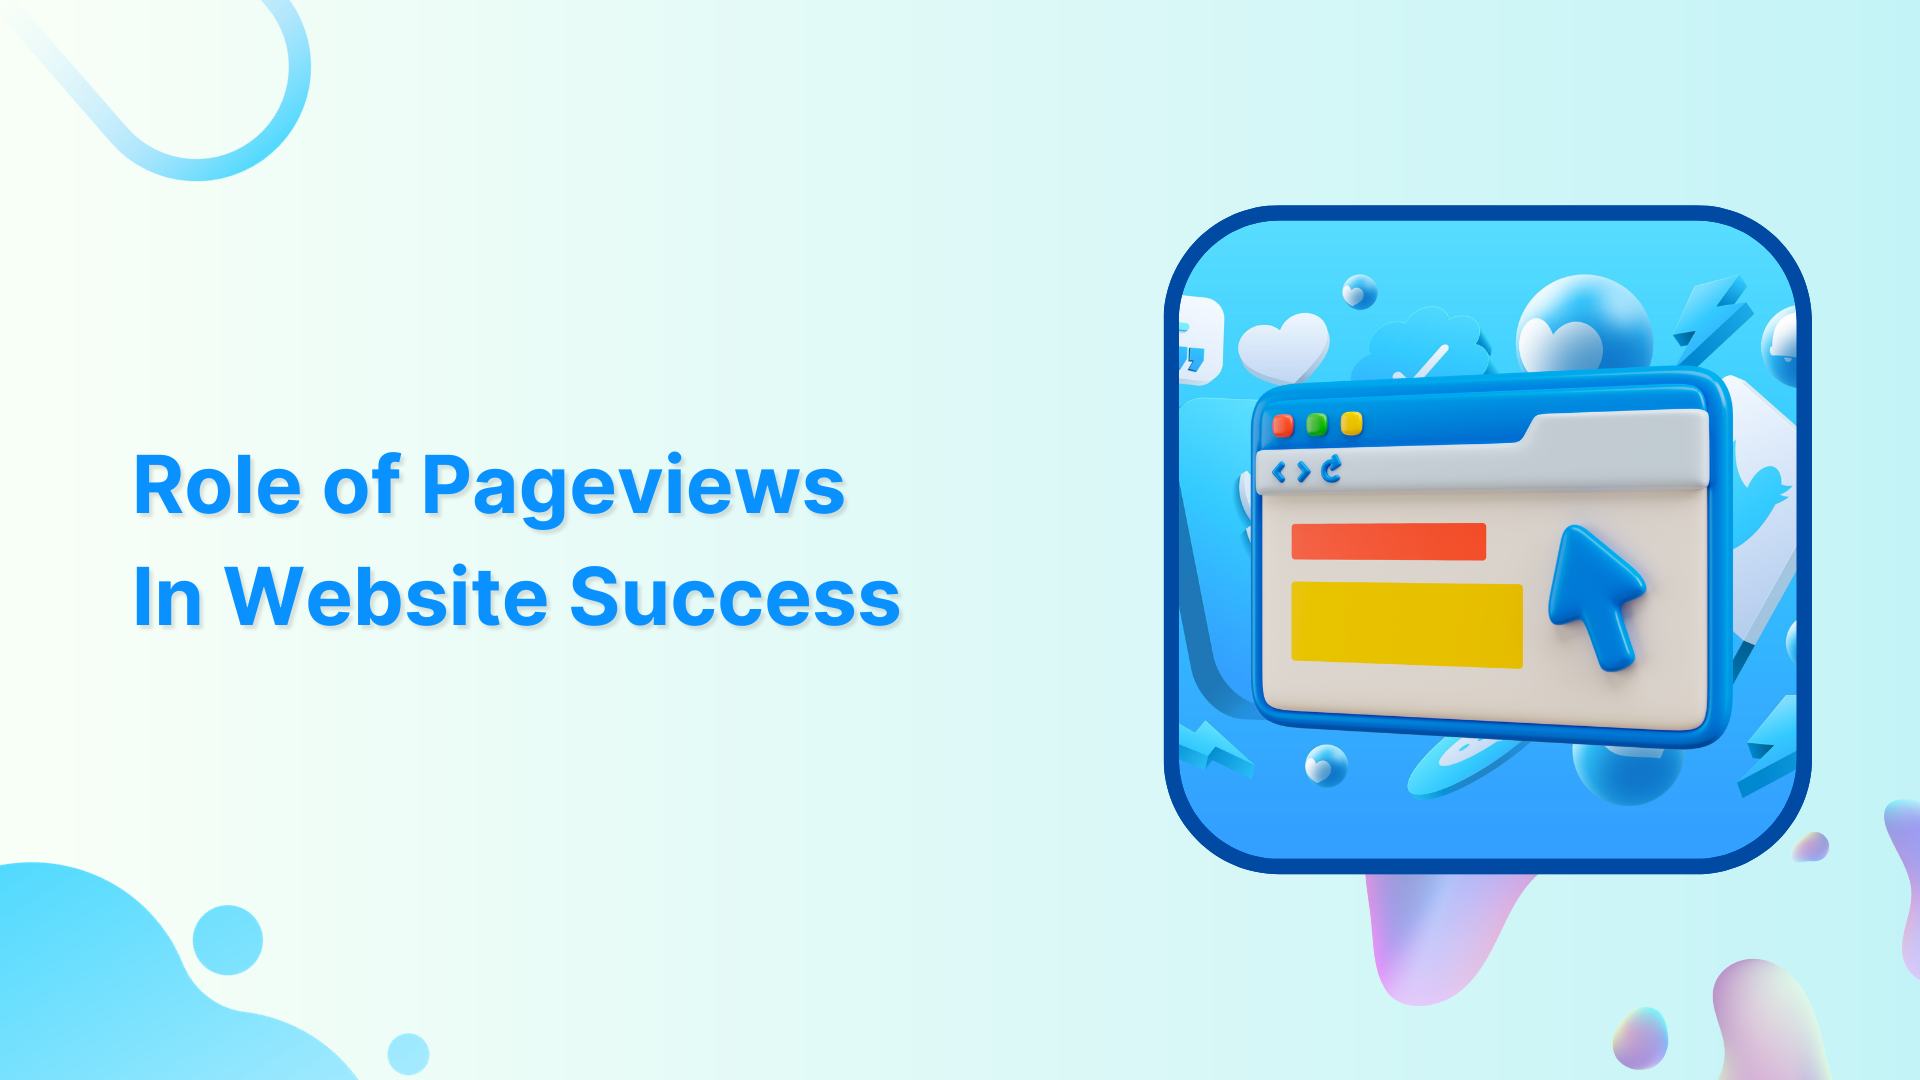 Pageviews & Their Role in Website Success